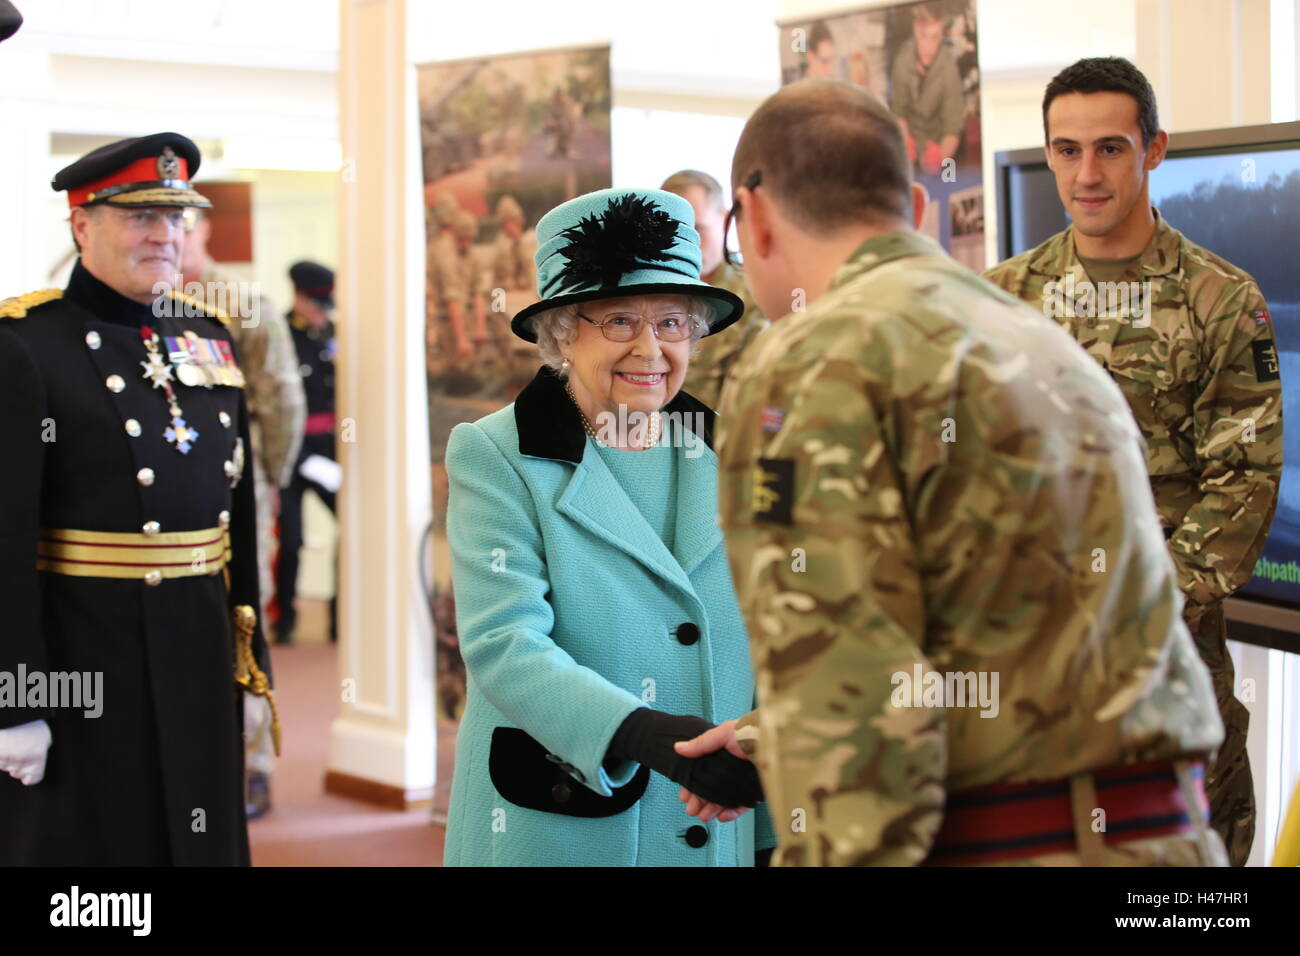 Queen Elizabeth II during a visit to the Corps of Royal Engineers at Brompton Barracks in Chatham, Kent, to celebrate their 300th anniversary. Stock Photo